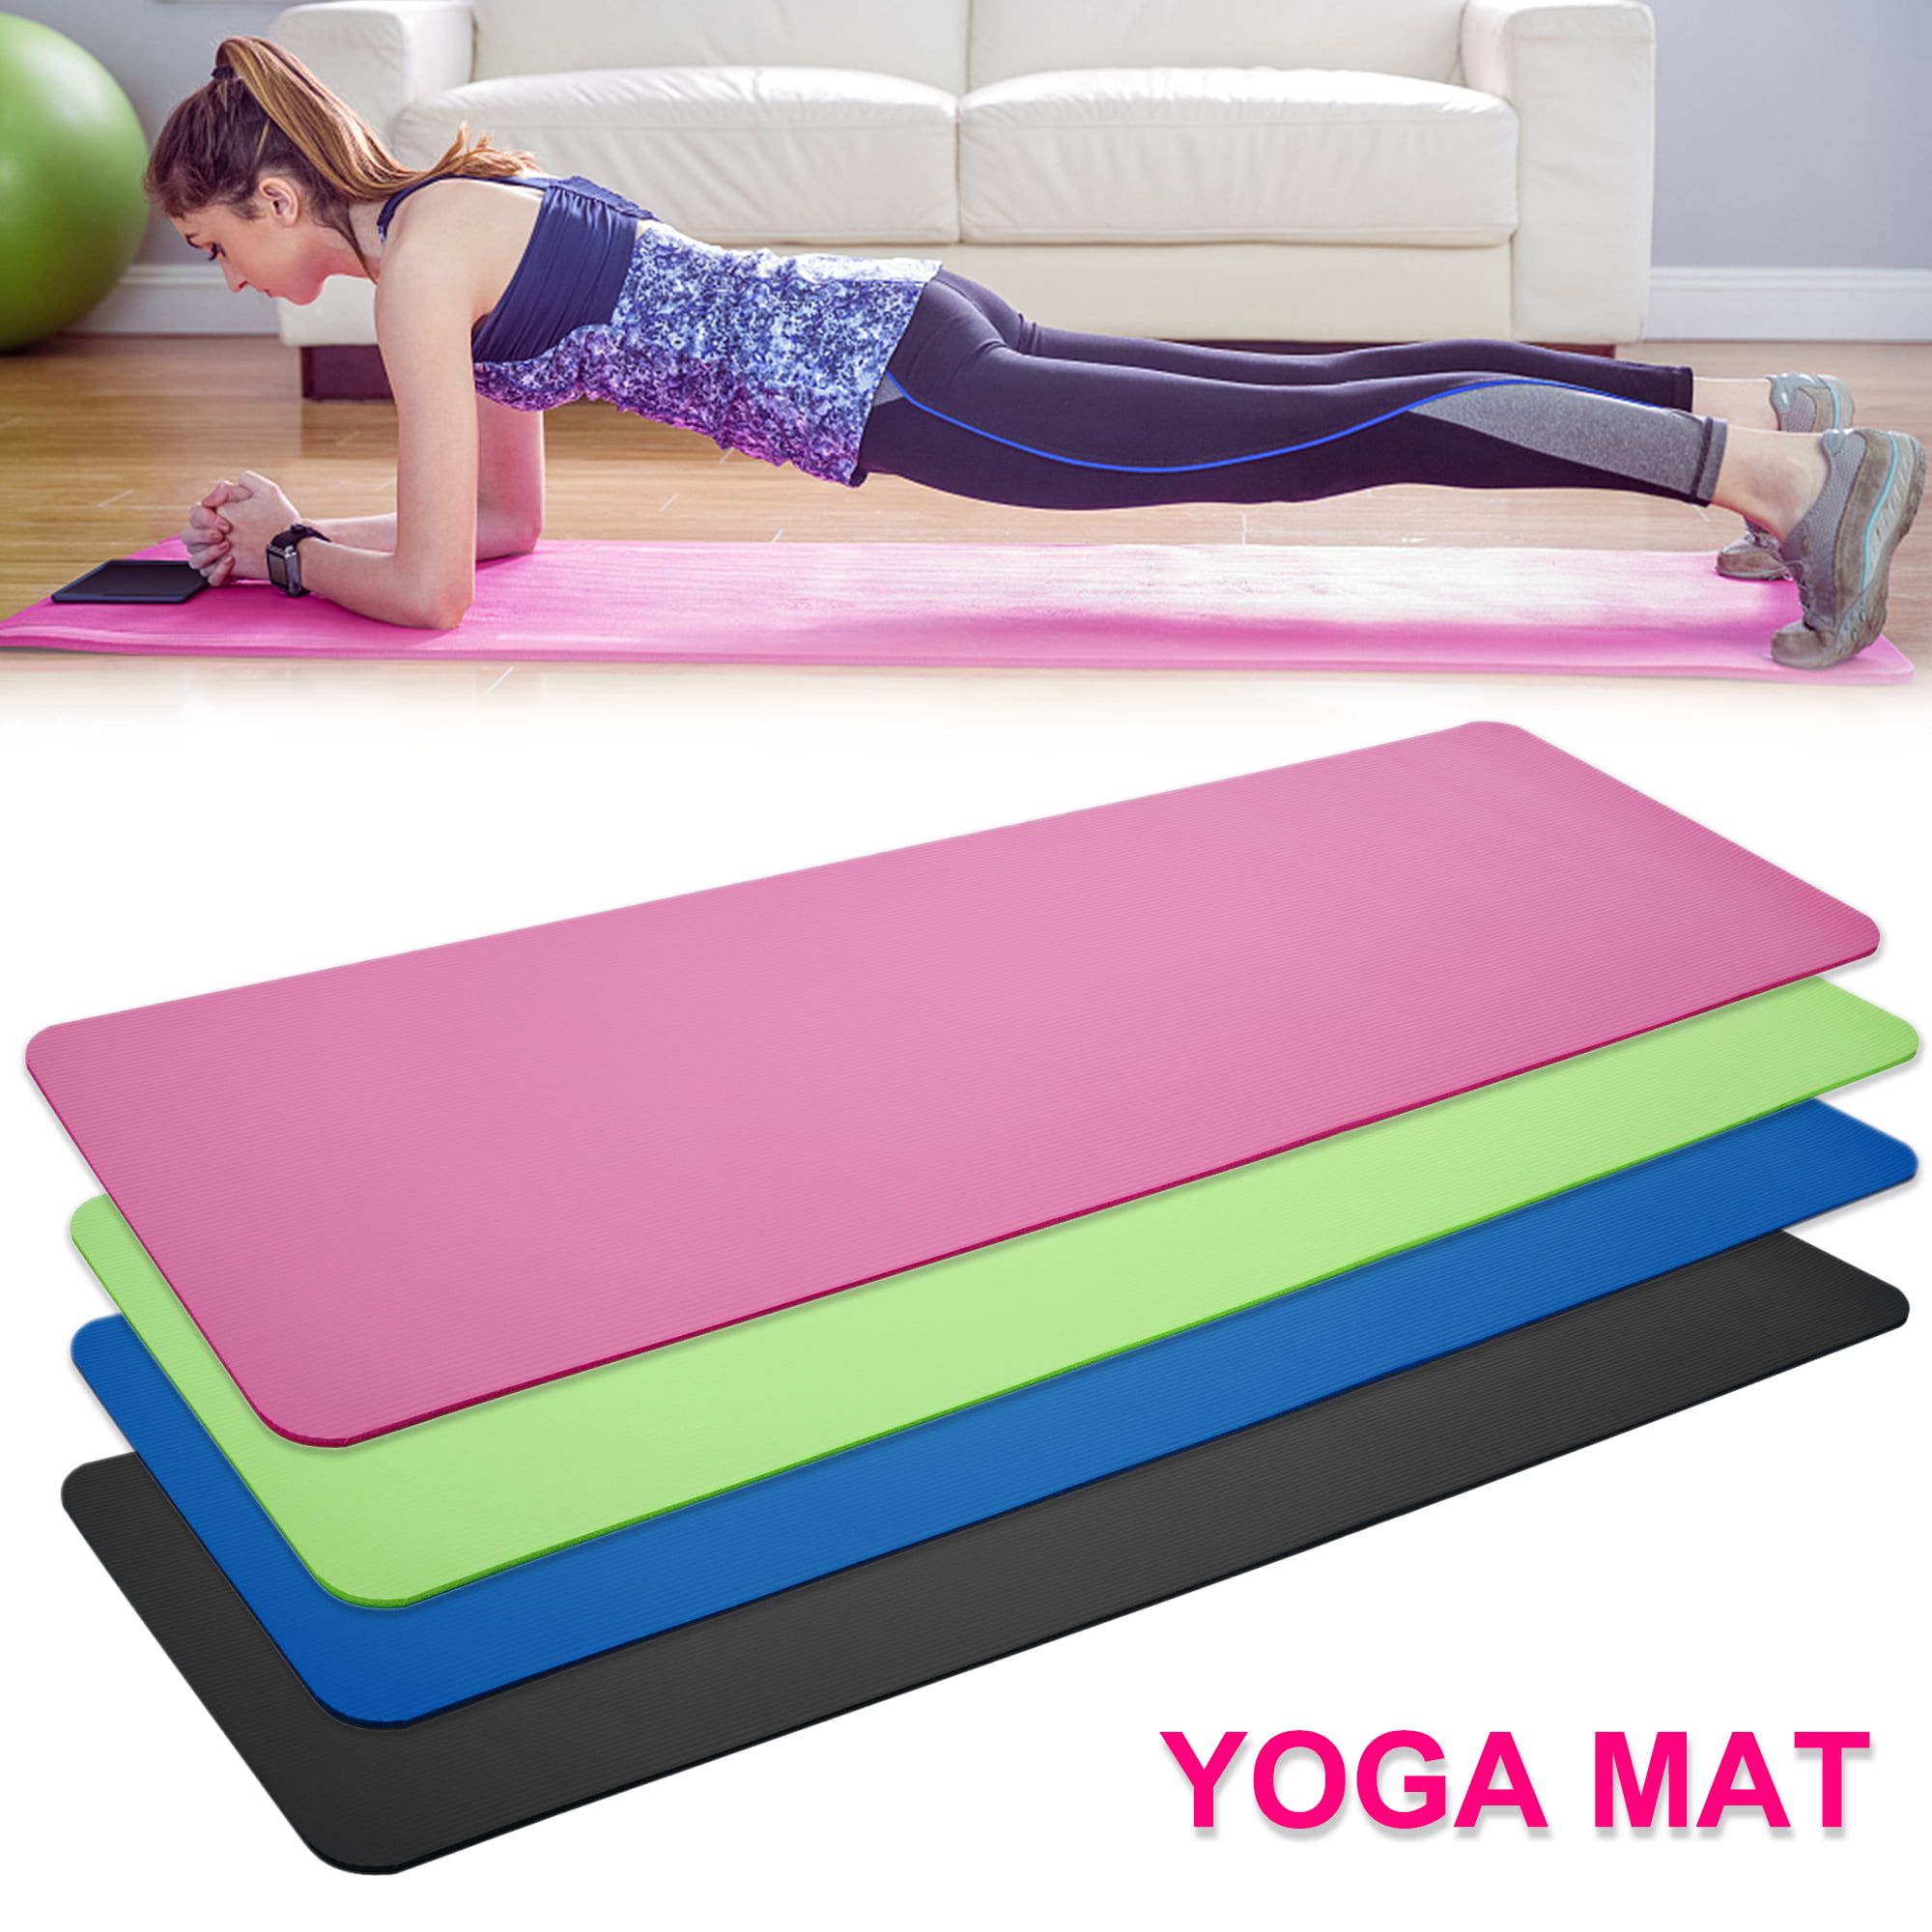 Non-Slip 10mm Thick Yoga Mat Indoor Exercise Fitness Pilates Gym Meditation Pad 